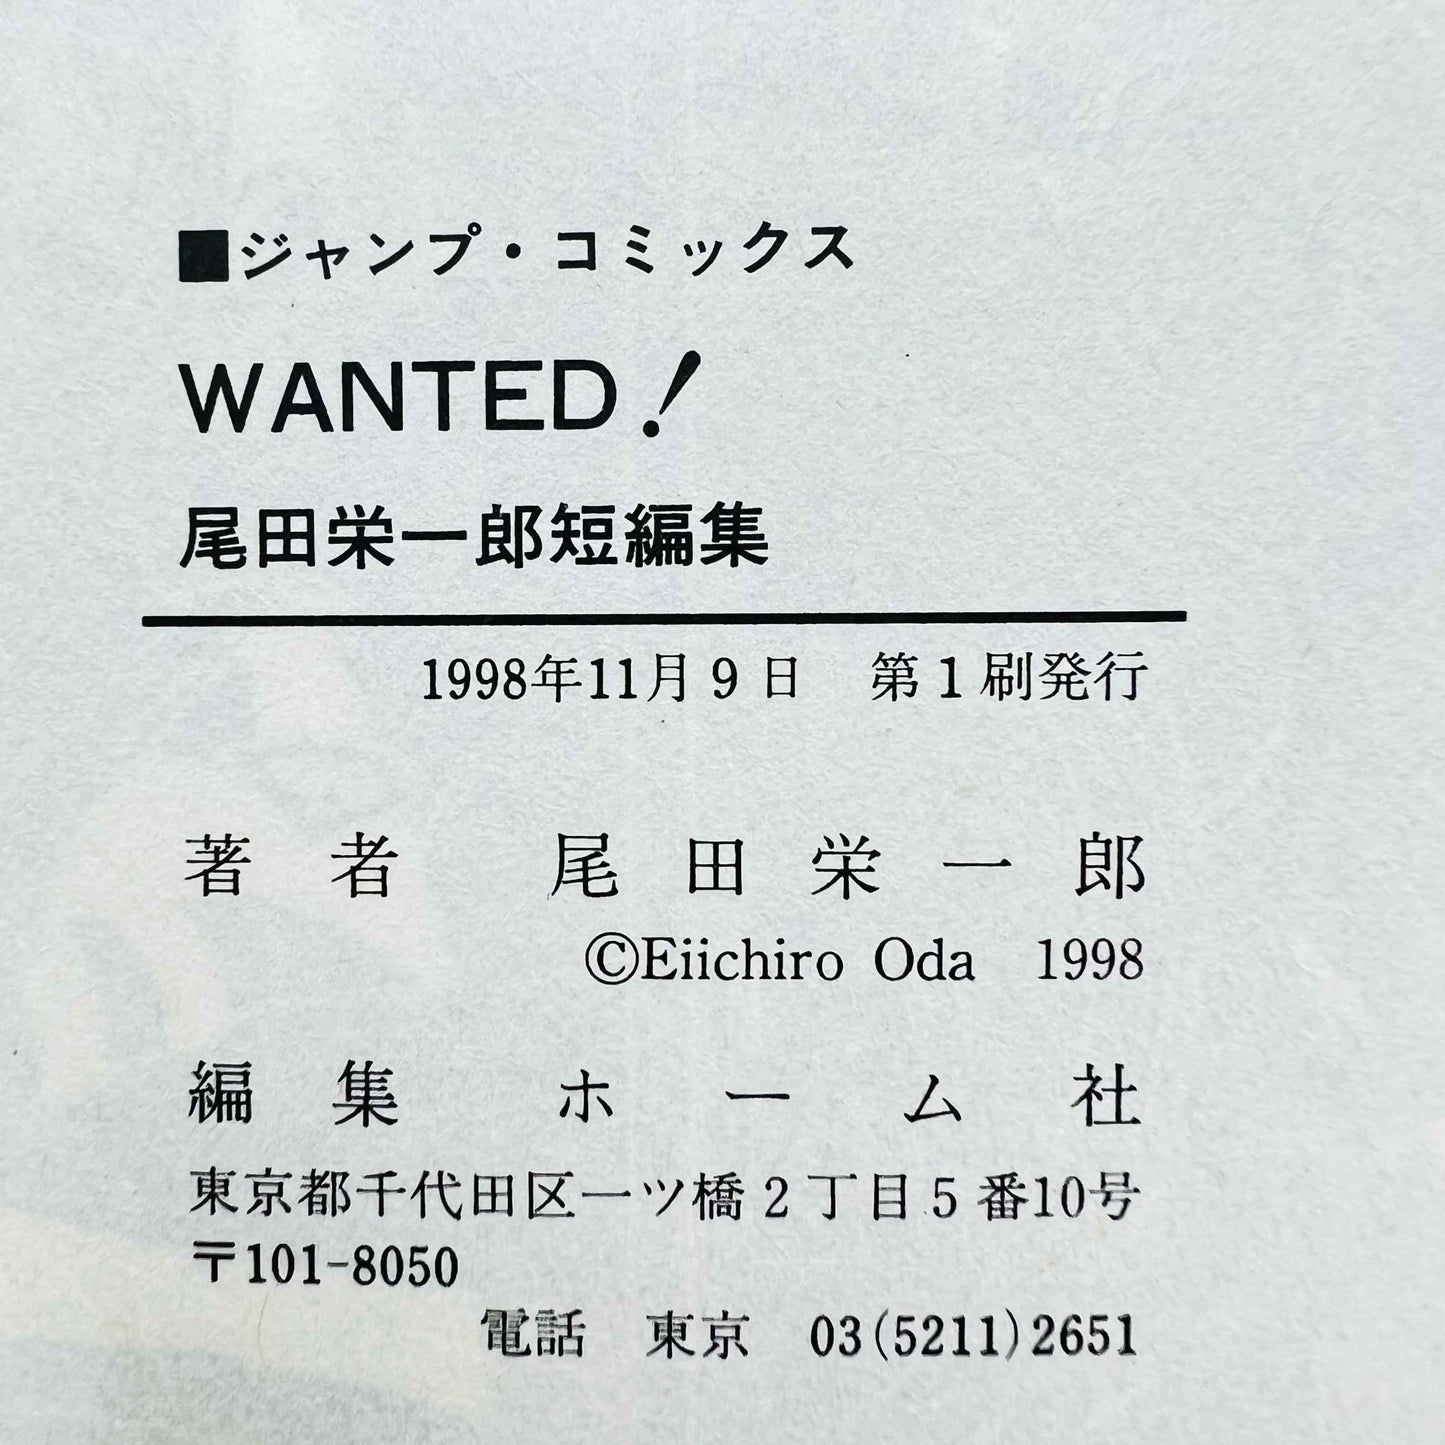 「Wish - Reserved」One Piece Wanted - 1stPrint.net - 1st First Print Edition Manga Store - M-OPWANTED-01-001